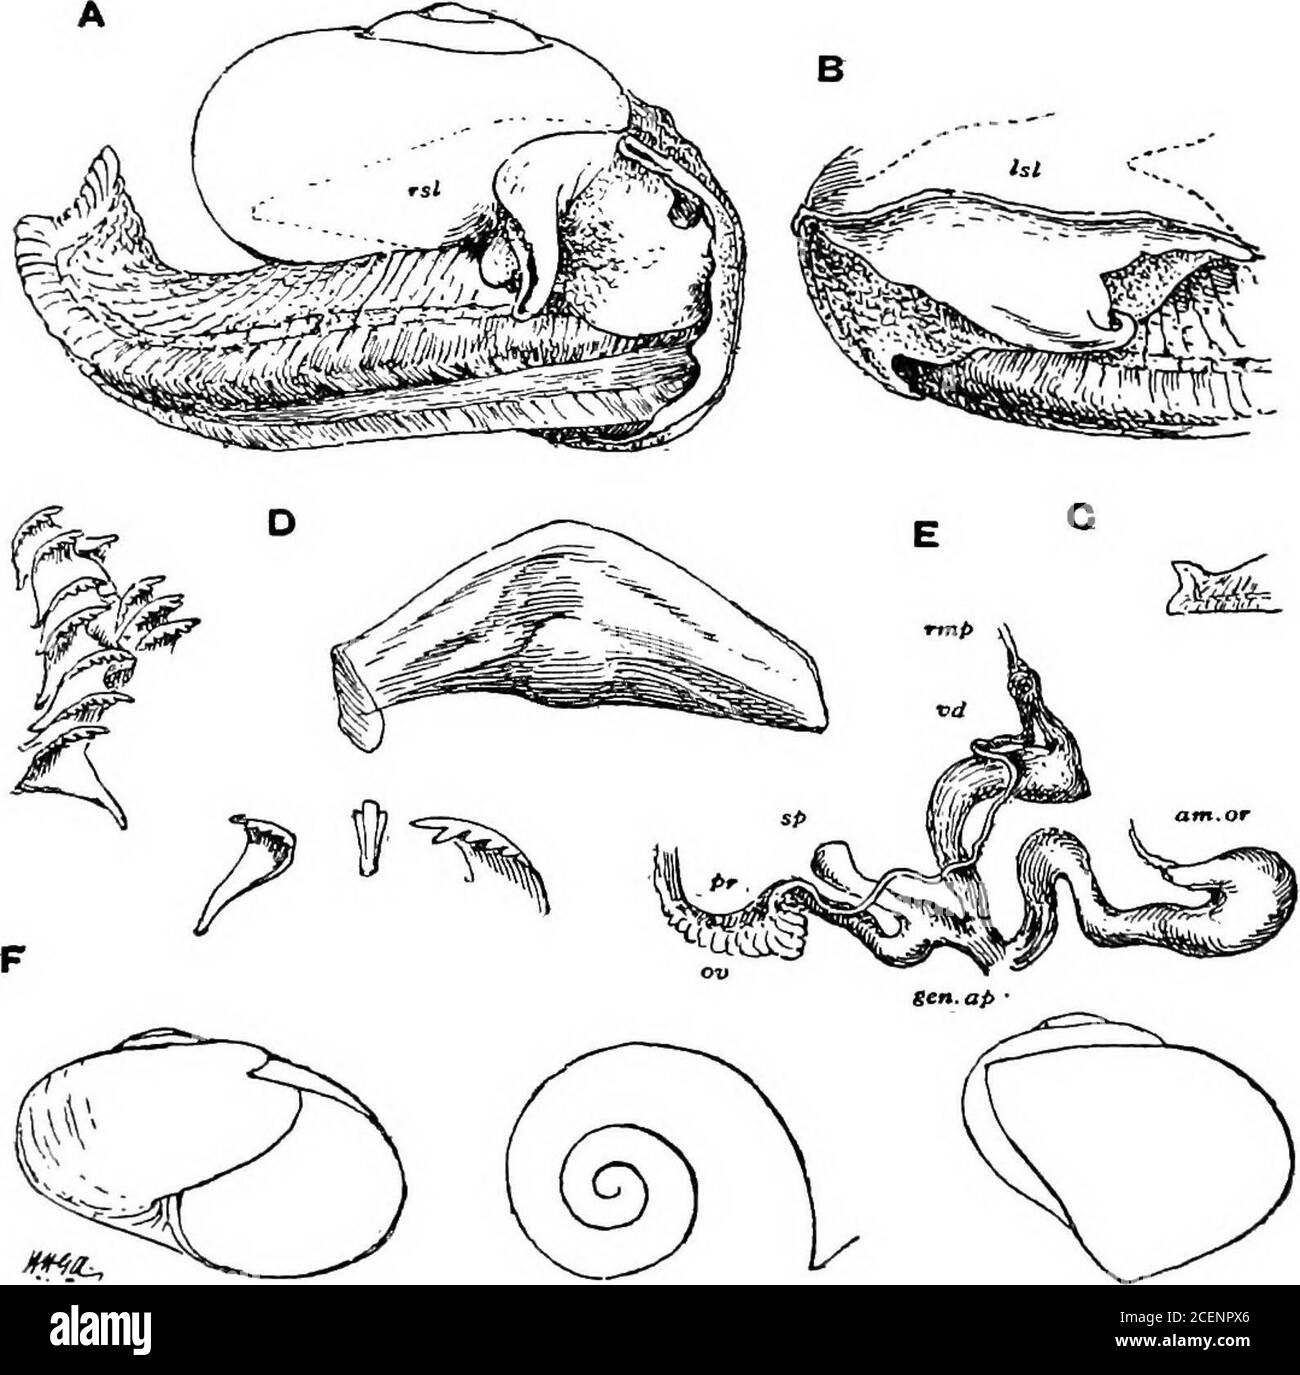 . Mollusca ... rms from Eastern Himalaya, Assam, and Burma. 318. Durgella levicula, Bs. (Helix) A. M. N. H. (3) iii, 1859, p. 391;Blf. A. M. N. m (3) xi, 1863, p. 81; id. (Nanina) J. A. 8. B.1865, 2, p. 87 ; Pfr. (Helix) Mon. Hel. v, 1868, p. 48; H. ^ T.(Helix) C. I. 1876, pi. 90, ligs. 1,4; Godvnn-Auxten, Jour. Linn.Soc, Zool. XV, 1881, p. 291 (anatomy) ; Nevill (Nanina), Sand-l.i, 1878, p. 26 ; Godioin-Austen, Mol. Ind. i, 1883, p. 142 ; id. t. c.ii, 1898, p. 61, pi. 76, figs. 1-6 (anatomy). Shell subperforate or very narrowly .perforate, globosely de- 214 ZONITIDiE. pressed, thin, almost sm Stock Photo